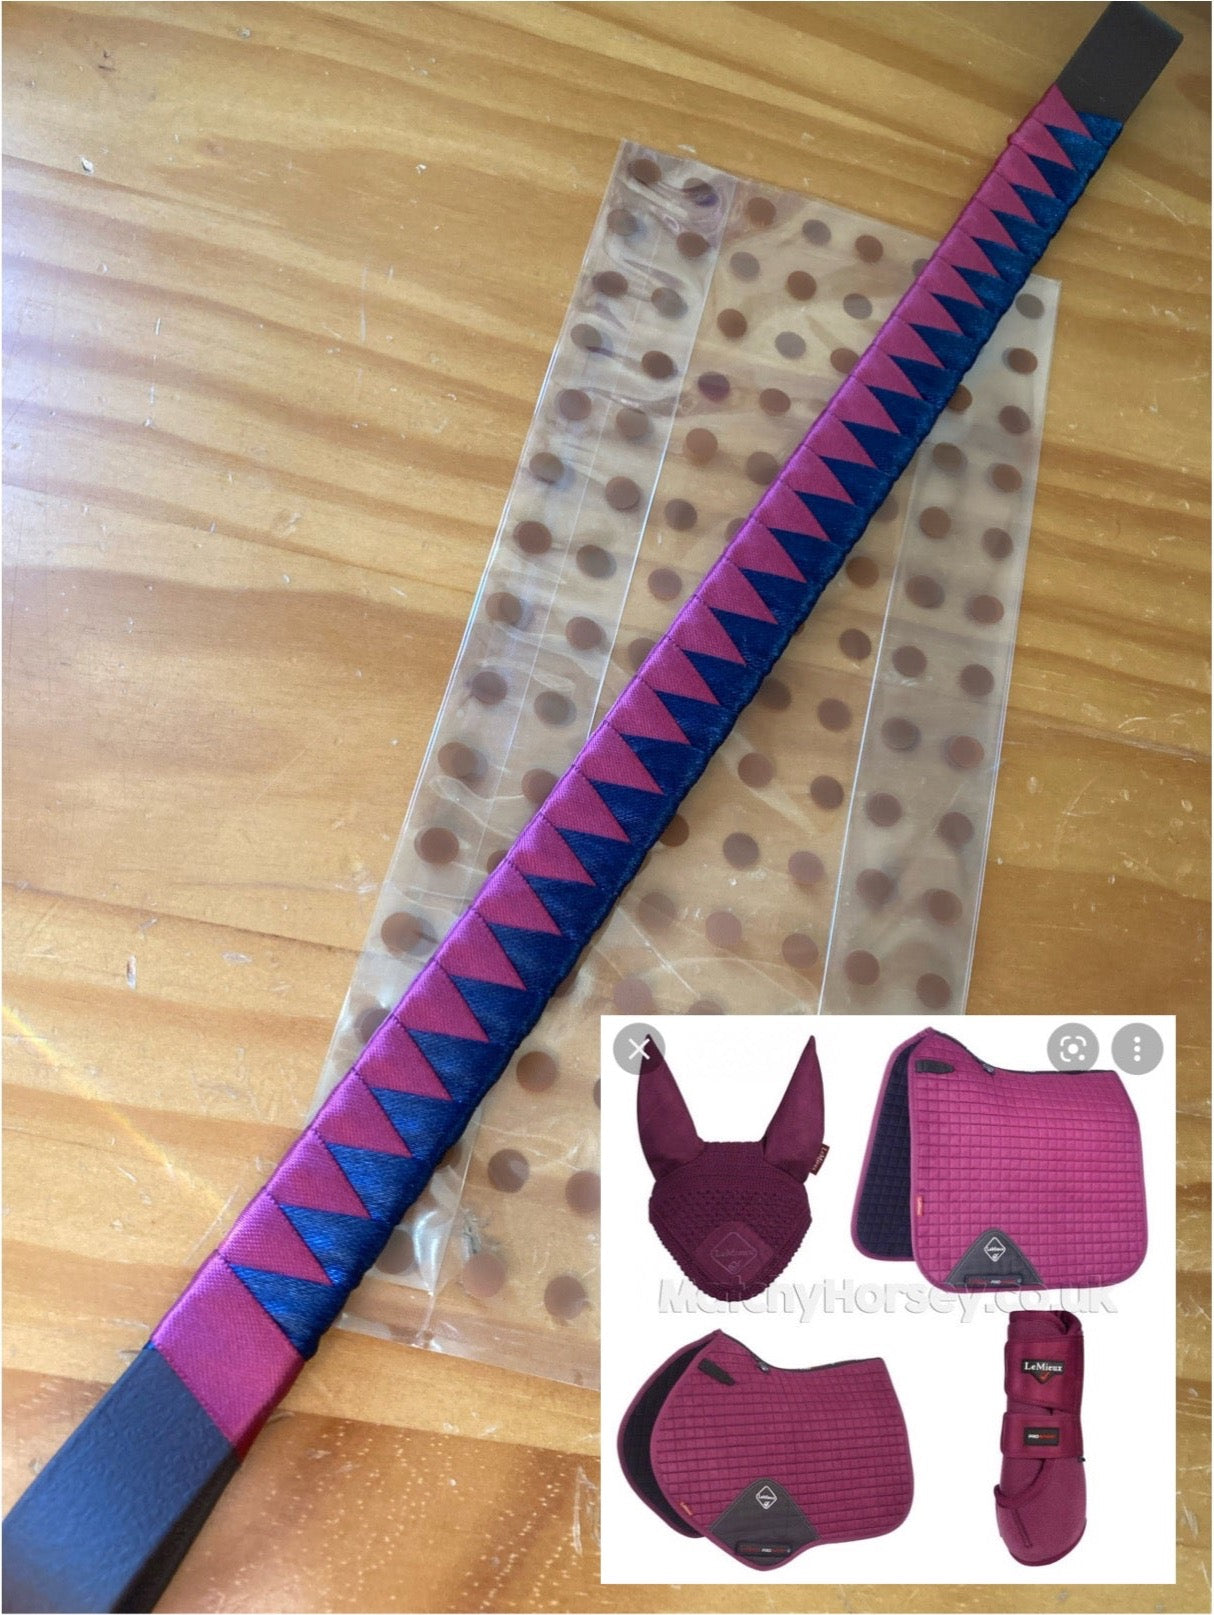 a plum and navy bespoke browband made to match le Mieux's plum range